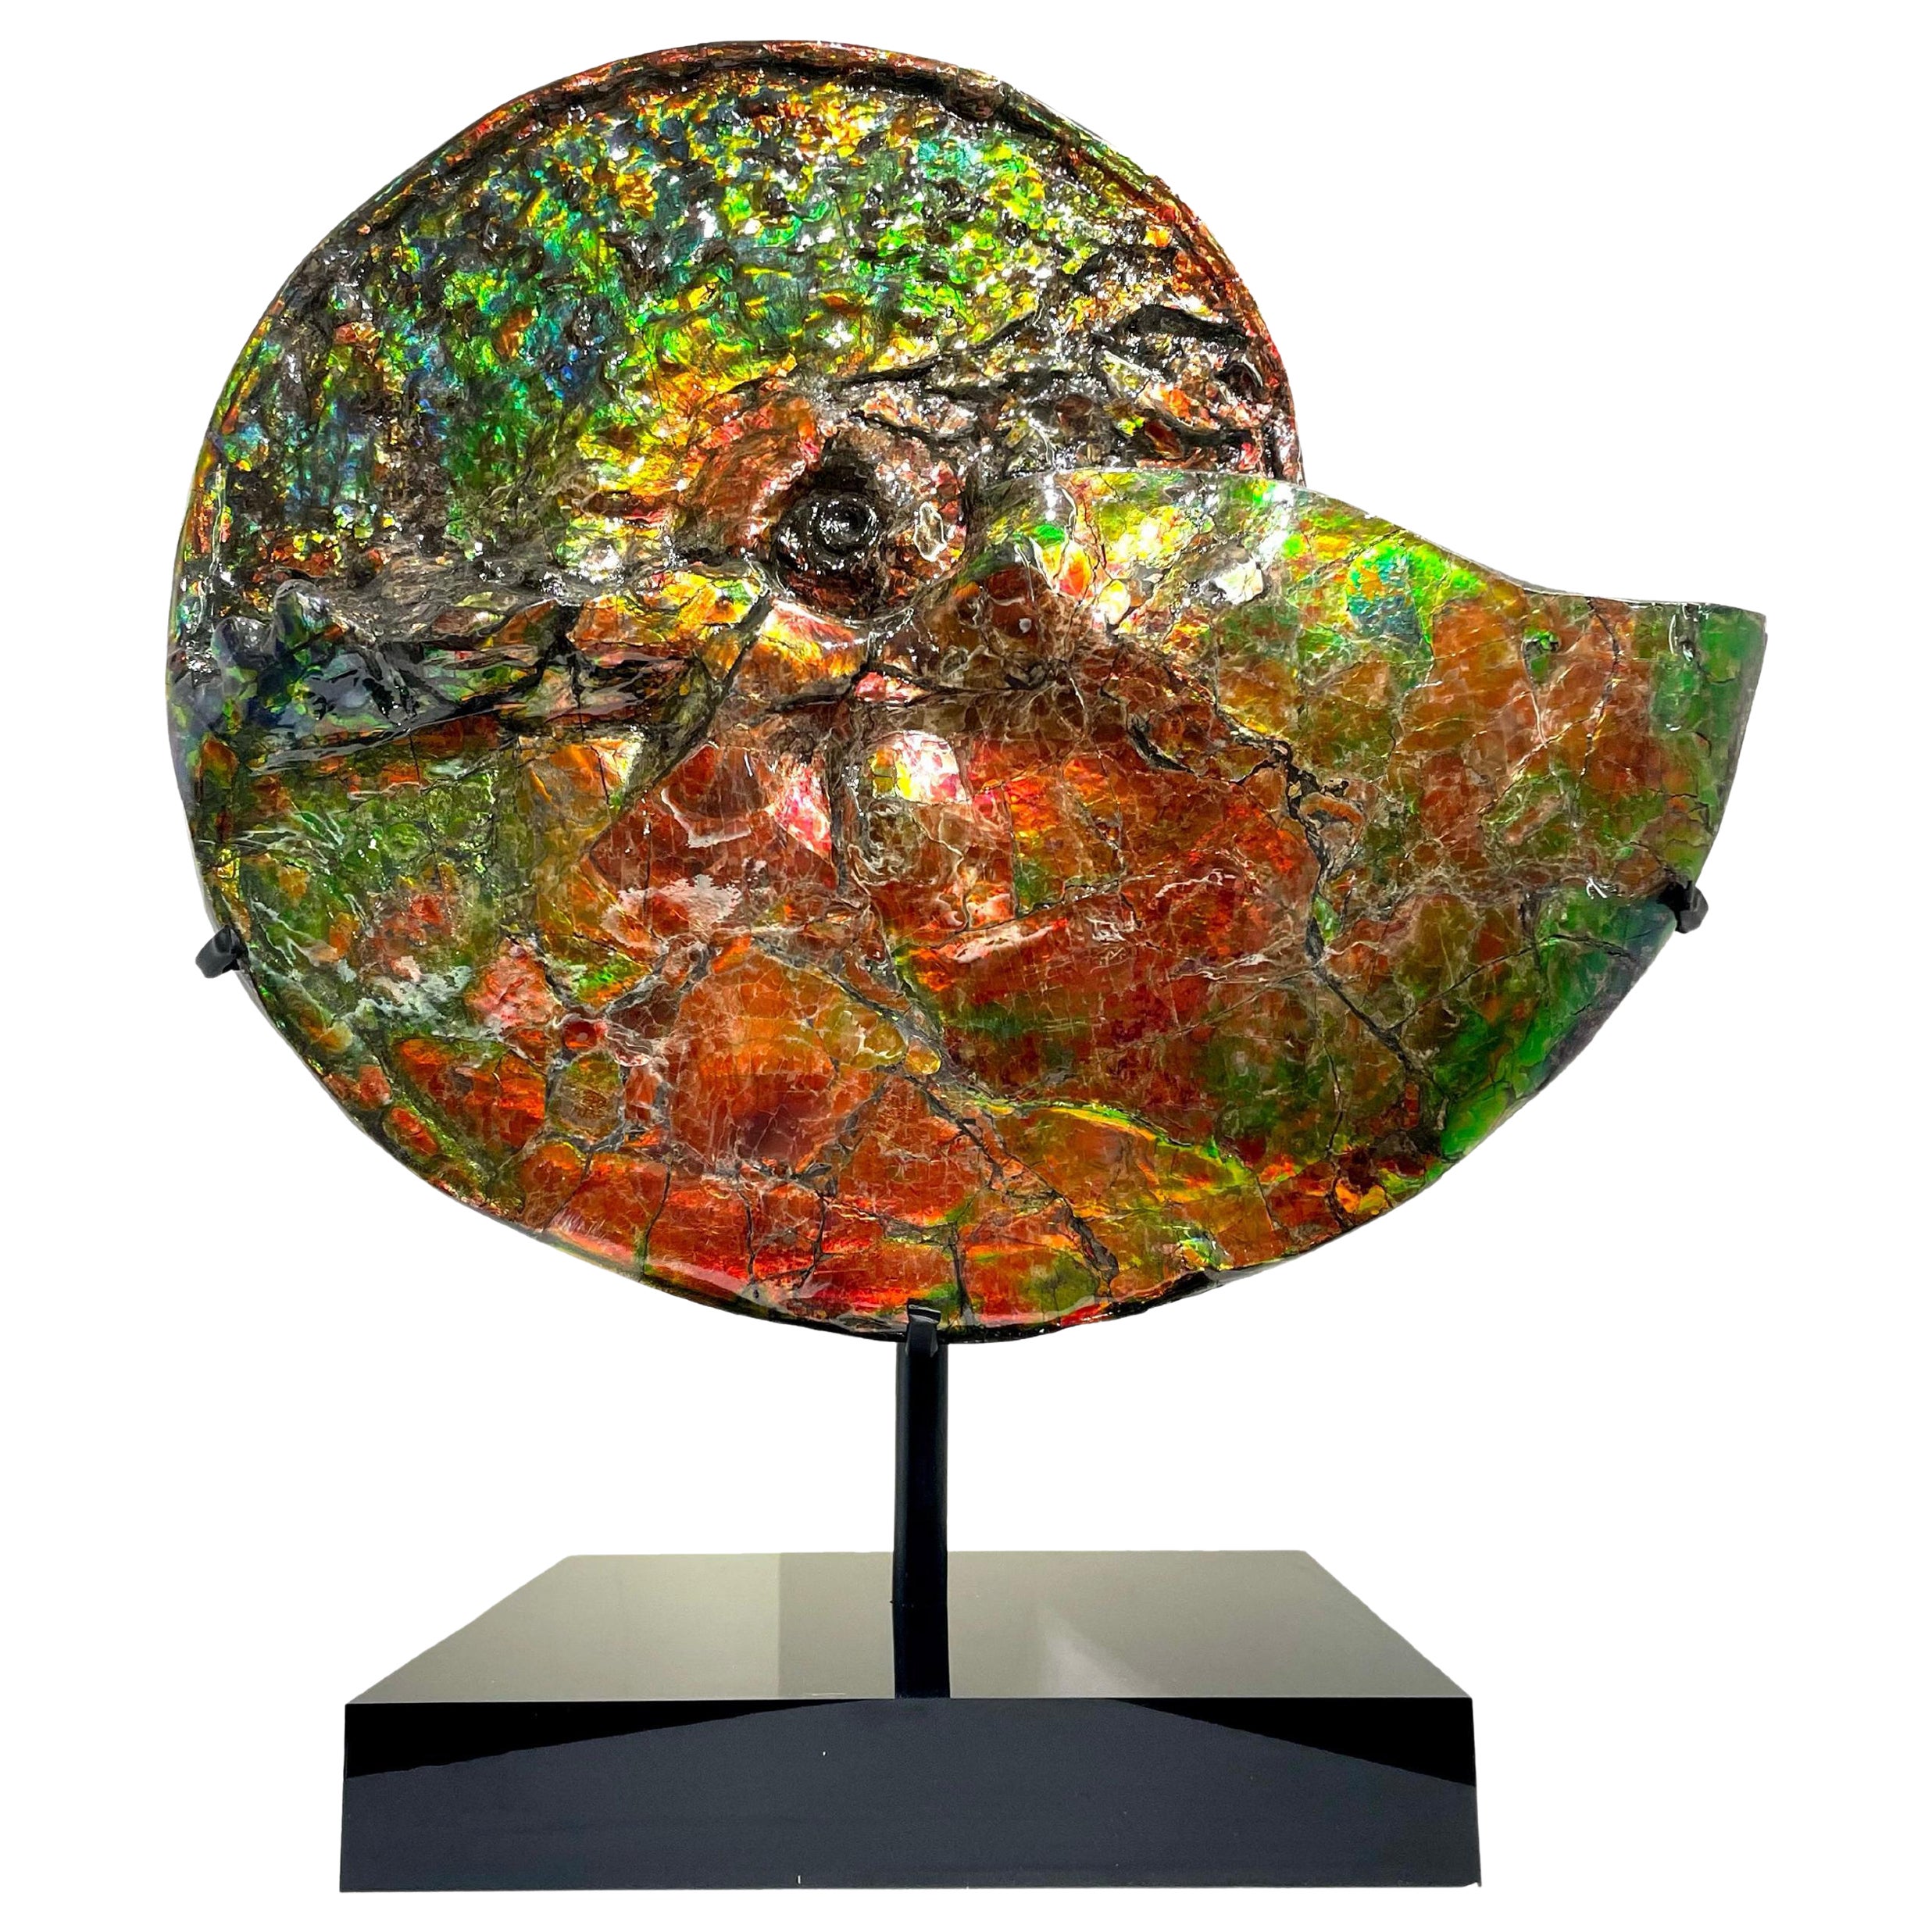 Large Rare Iridescent Ammonite Fossil with Blue, Green, Red and Orange Hues. For Sale